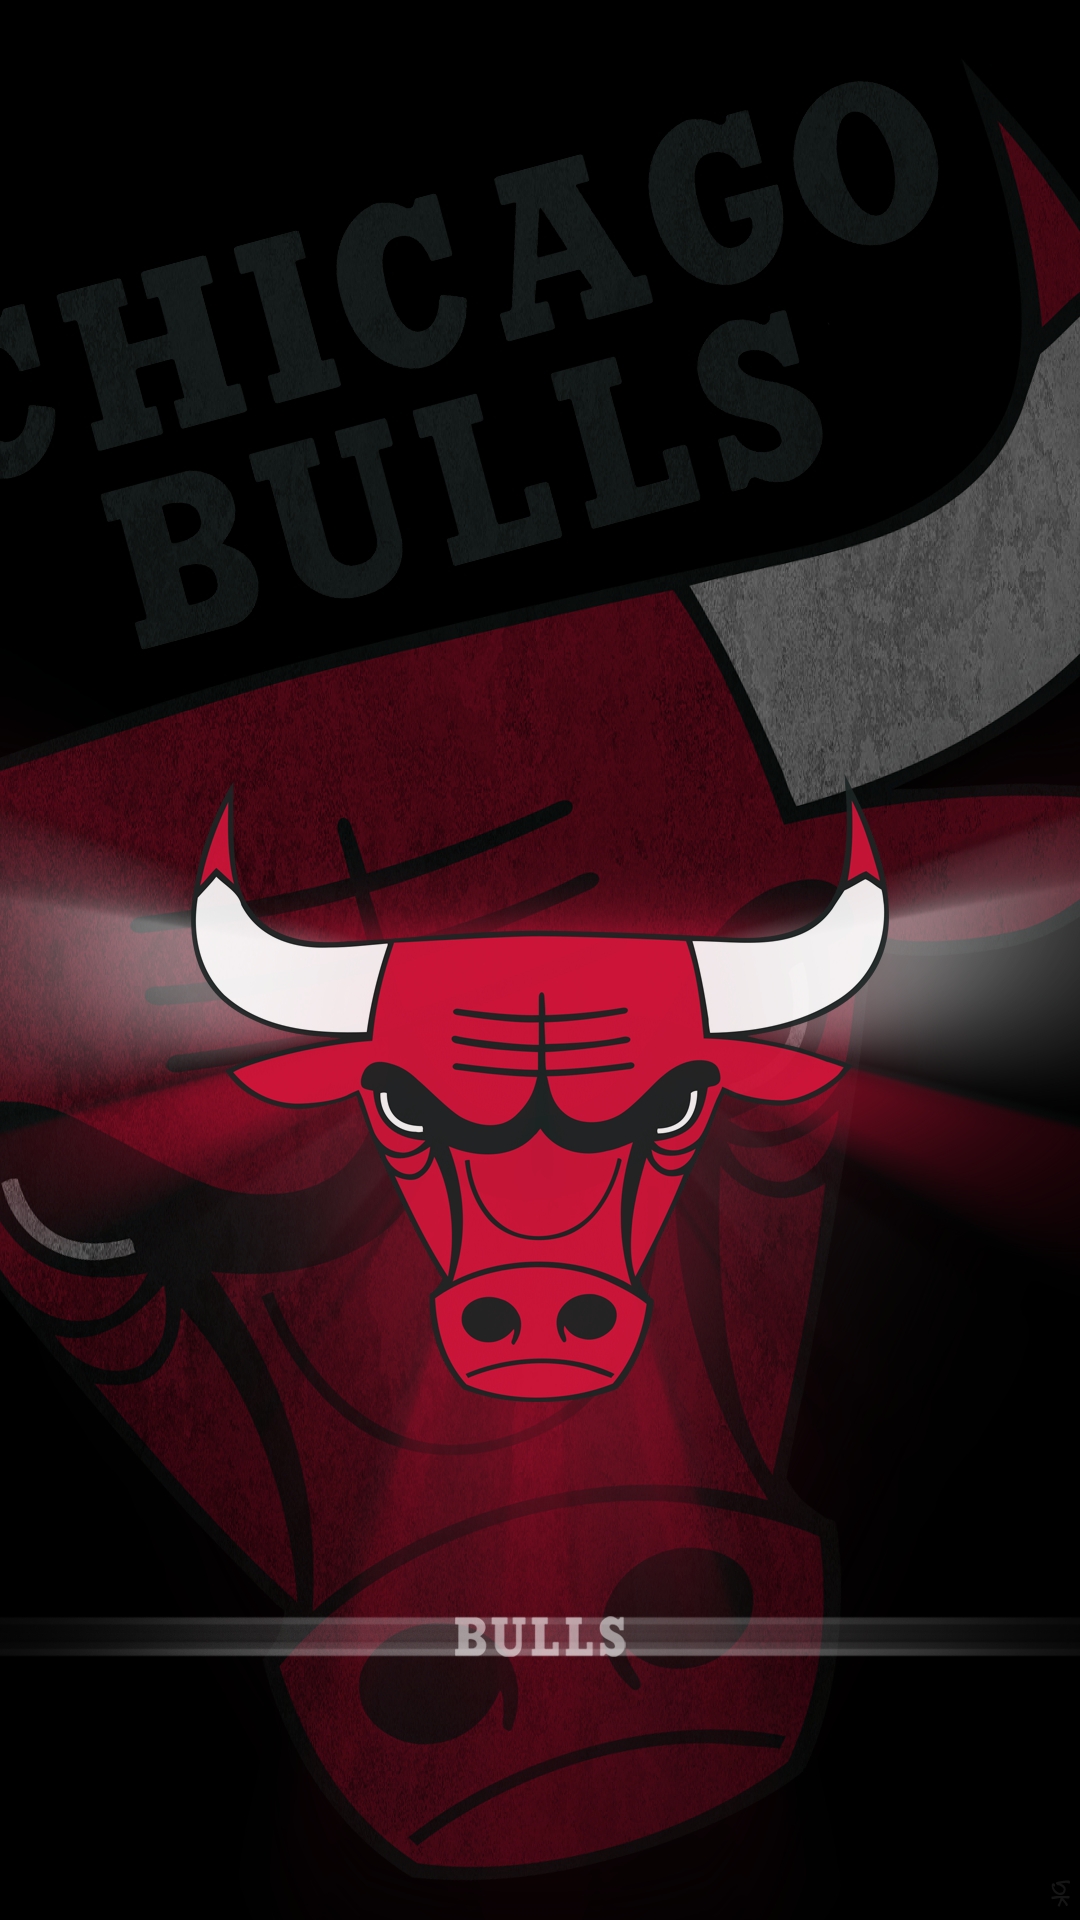 10 Most Popular Chicago Bulls Iphone Wallpapers FULL HD 1920×1080 For PC Desktop